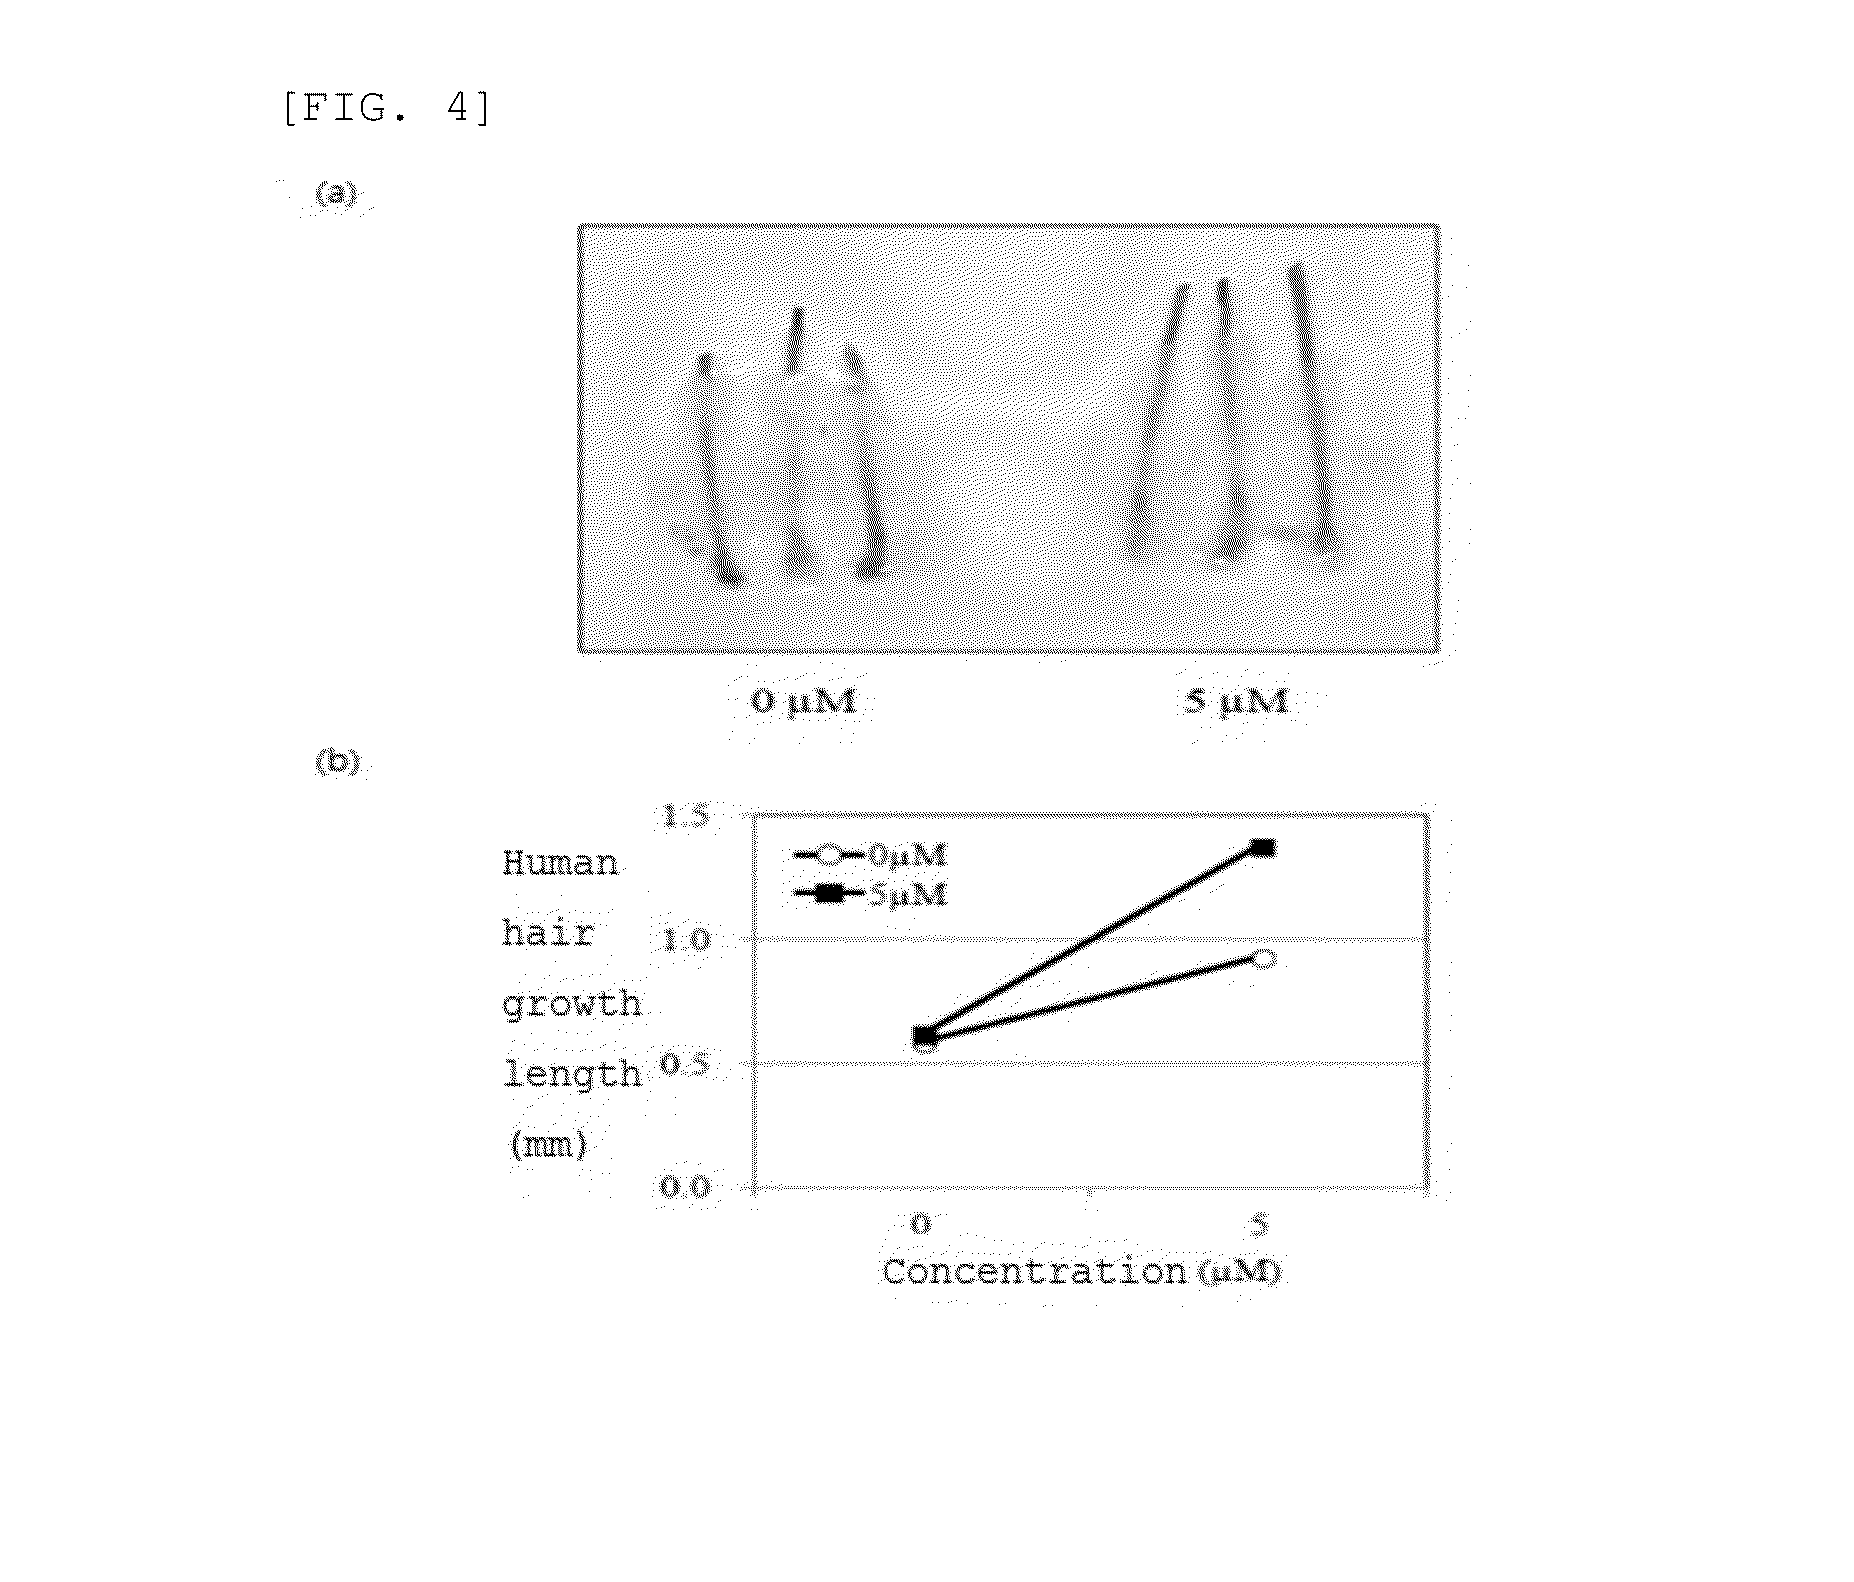 Composition for preventing hair loss and growing hair comprising hydroxydihydrobovolide